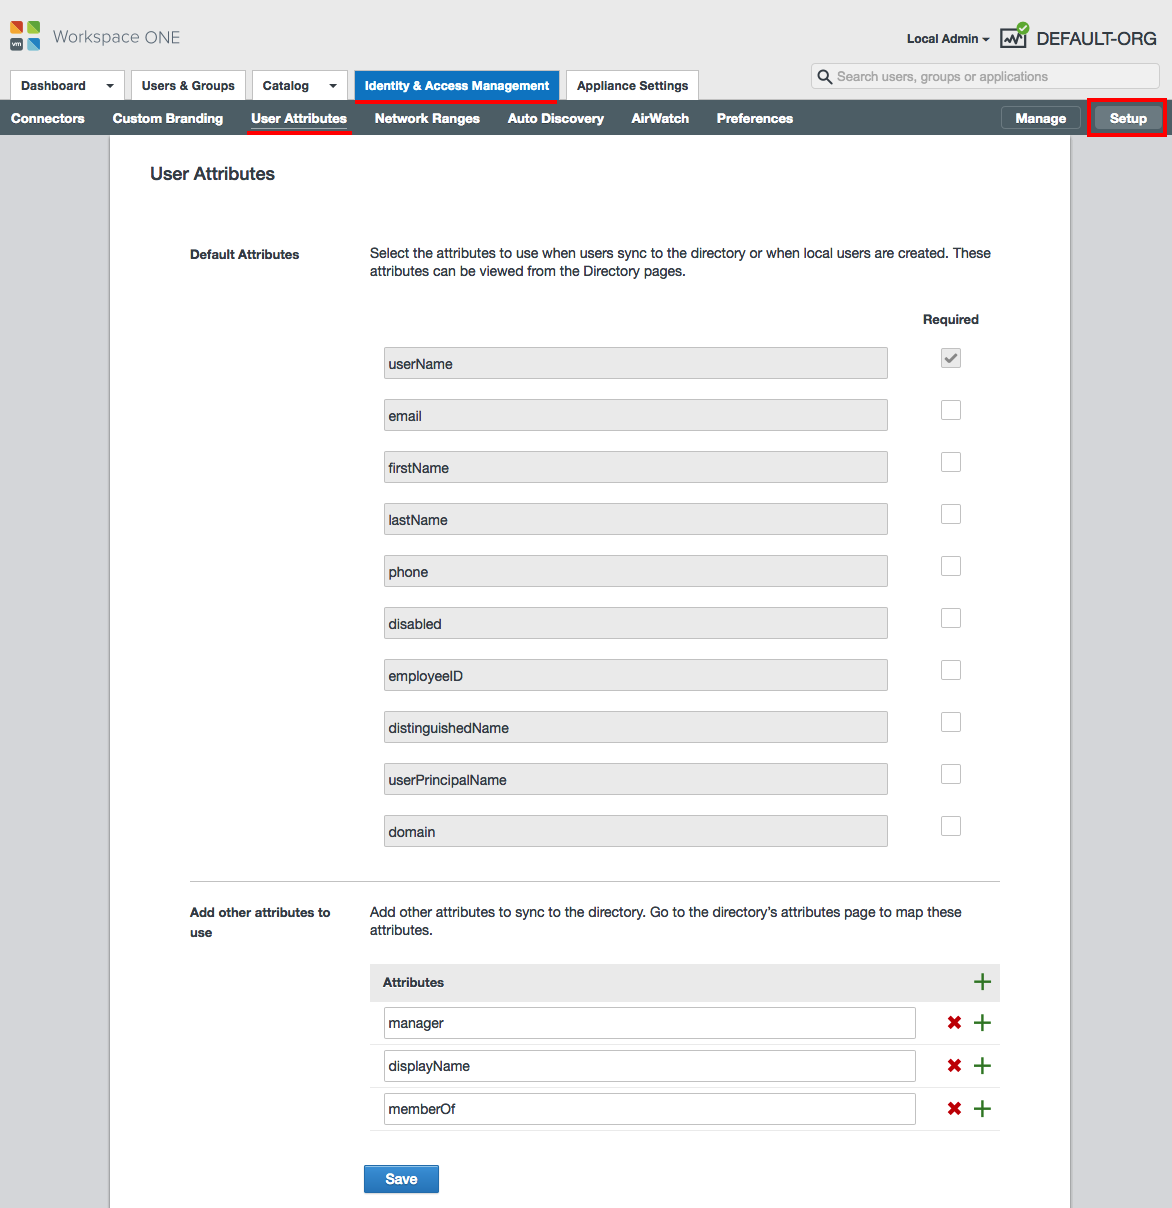 Screenshot of the user attributes page with the values that are described in the next substeps.